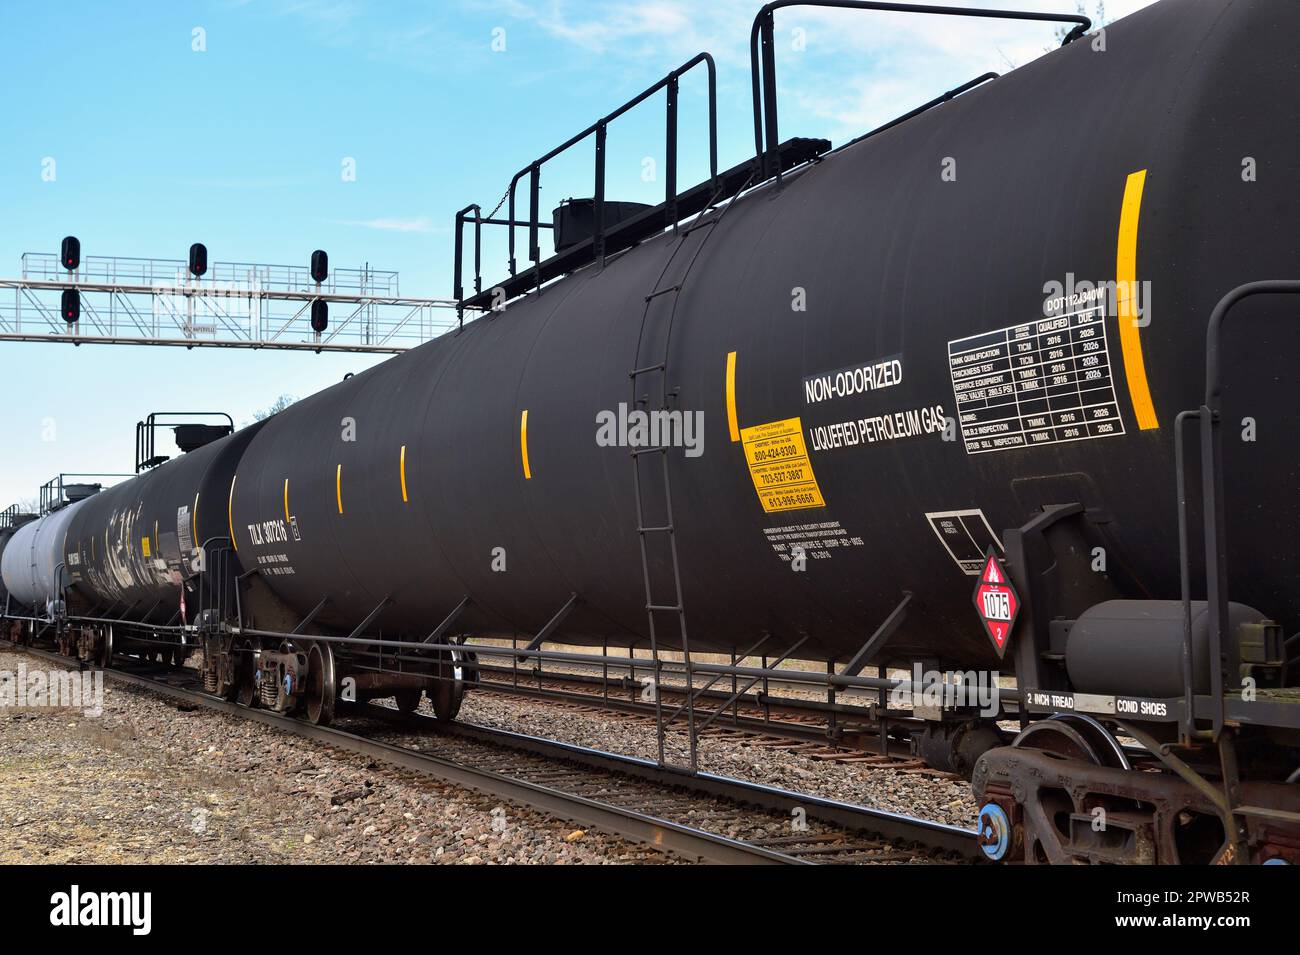 Naperville, Illinois, USA. A string of tank cars in a freight train passing through northeastern Illinois. Stock Photo